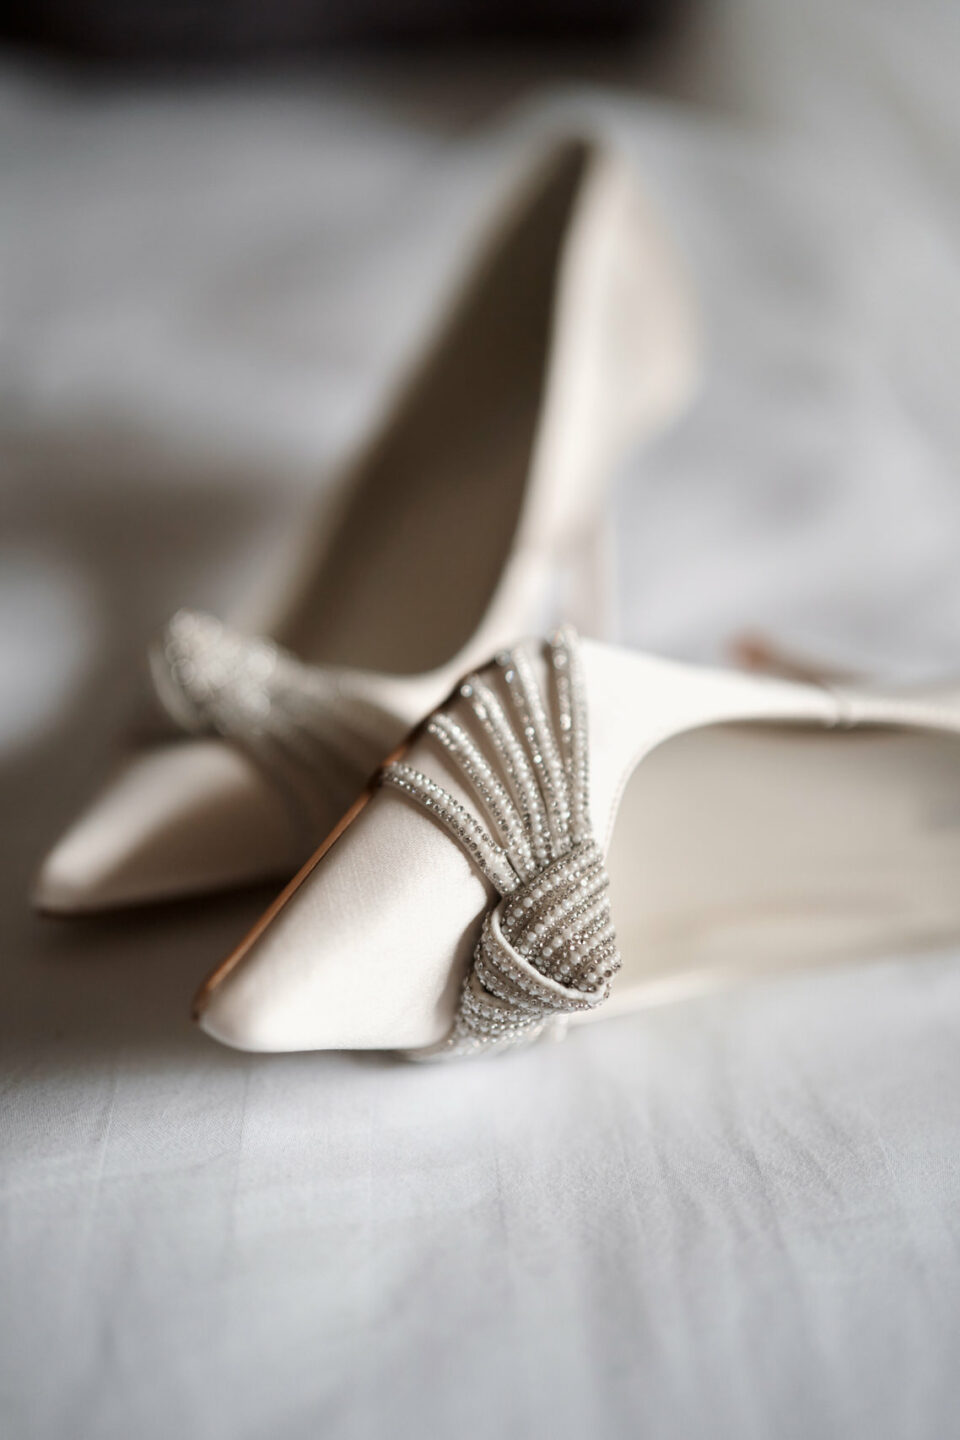 There's a pair of white wedding shoes on the bed.